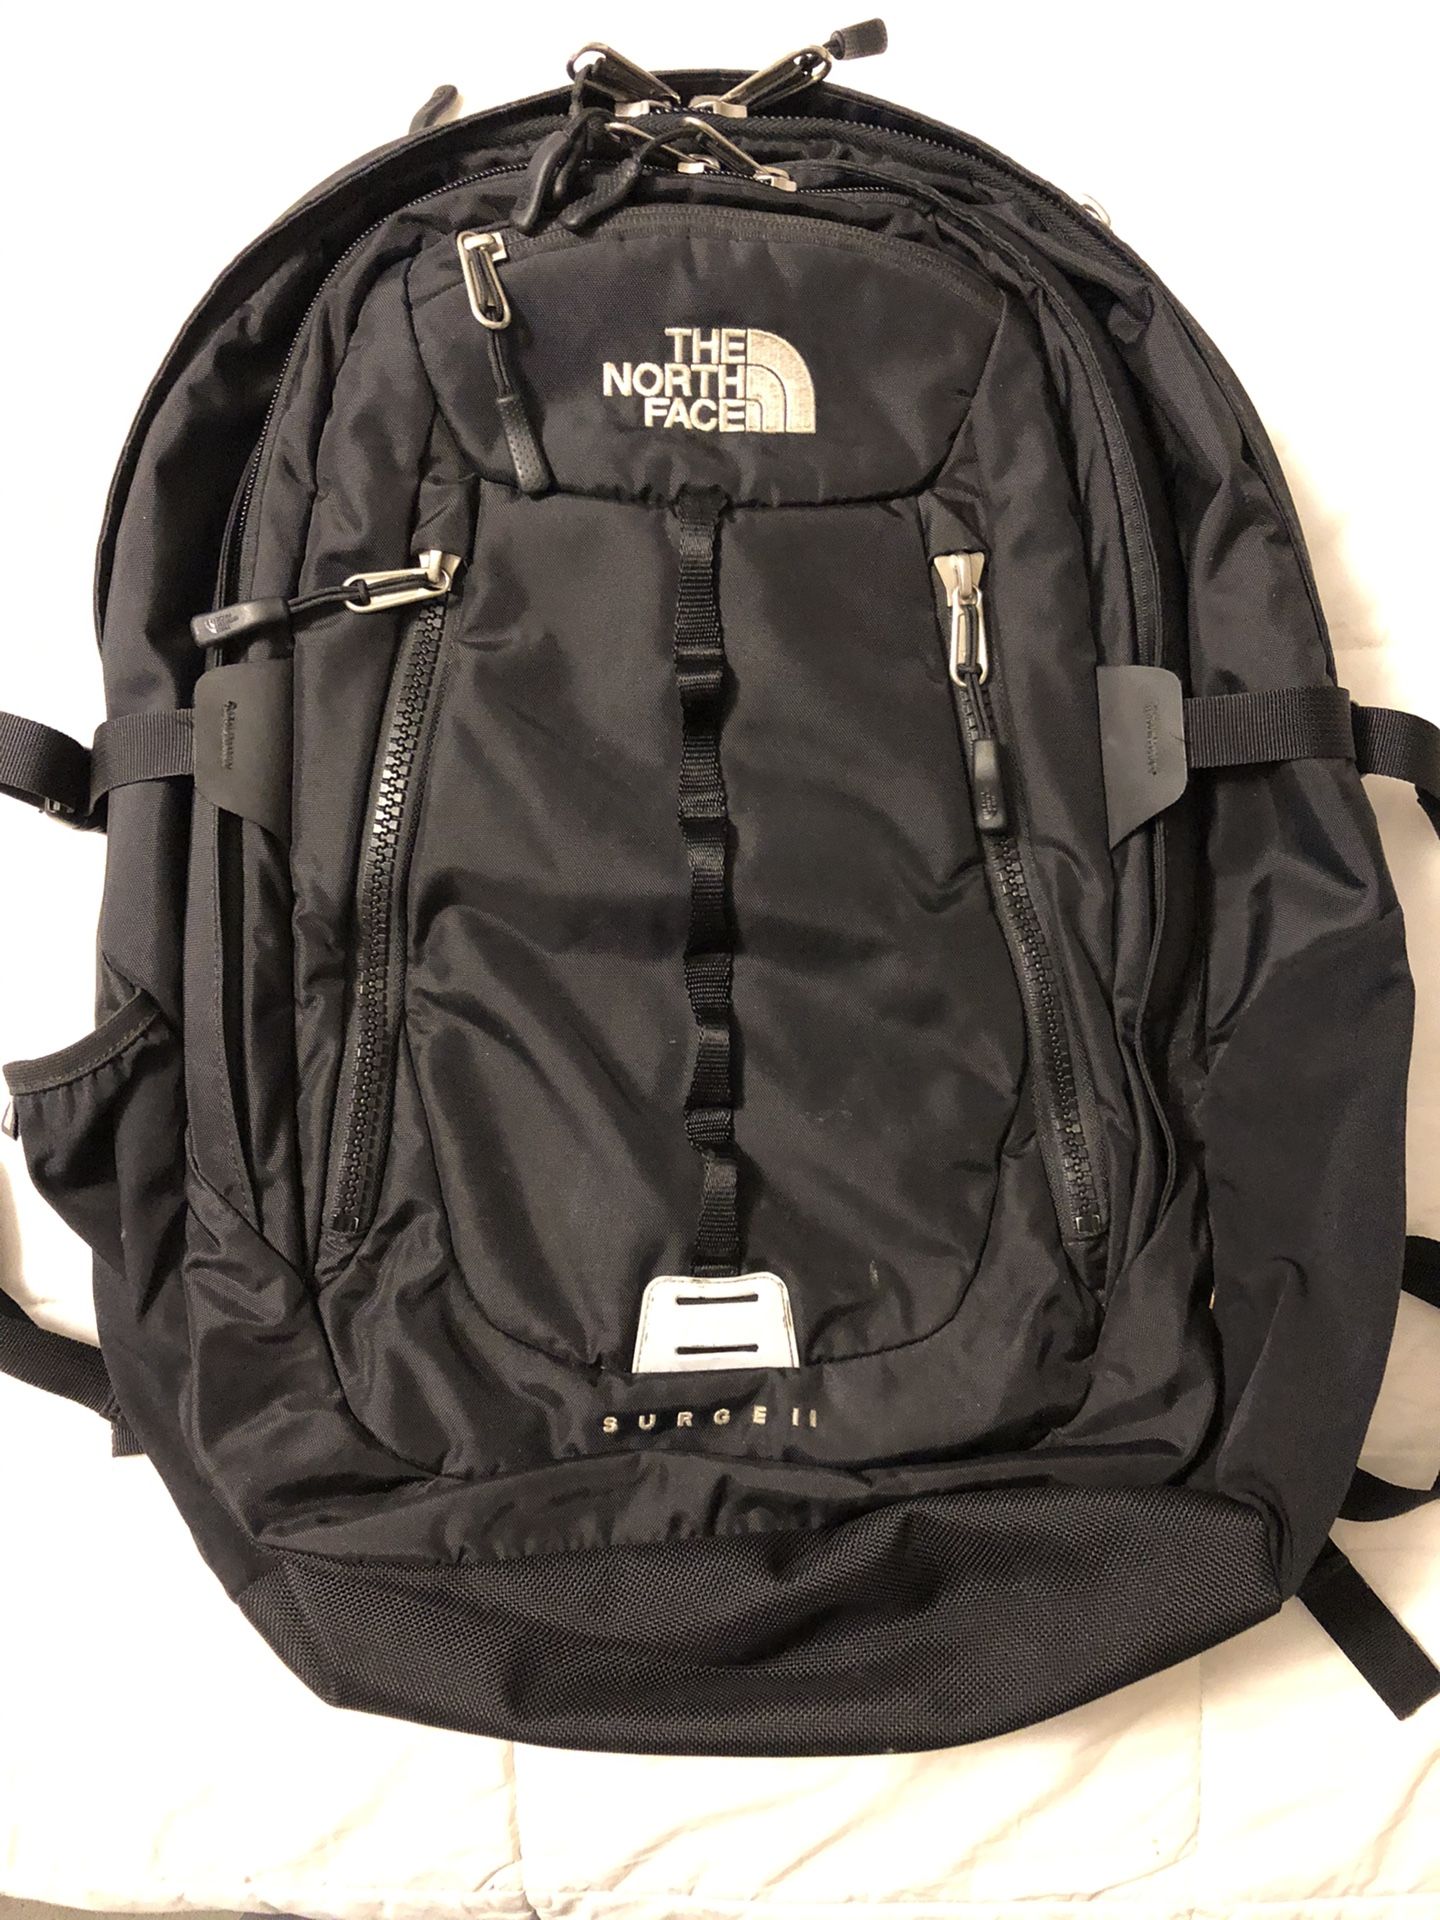 The North Face Surge 2 Backpack